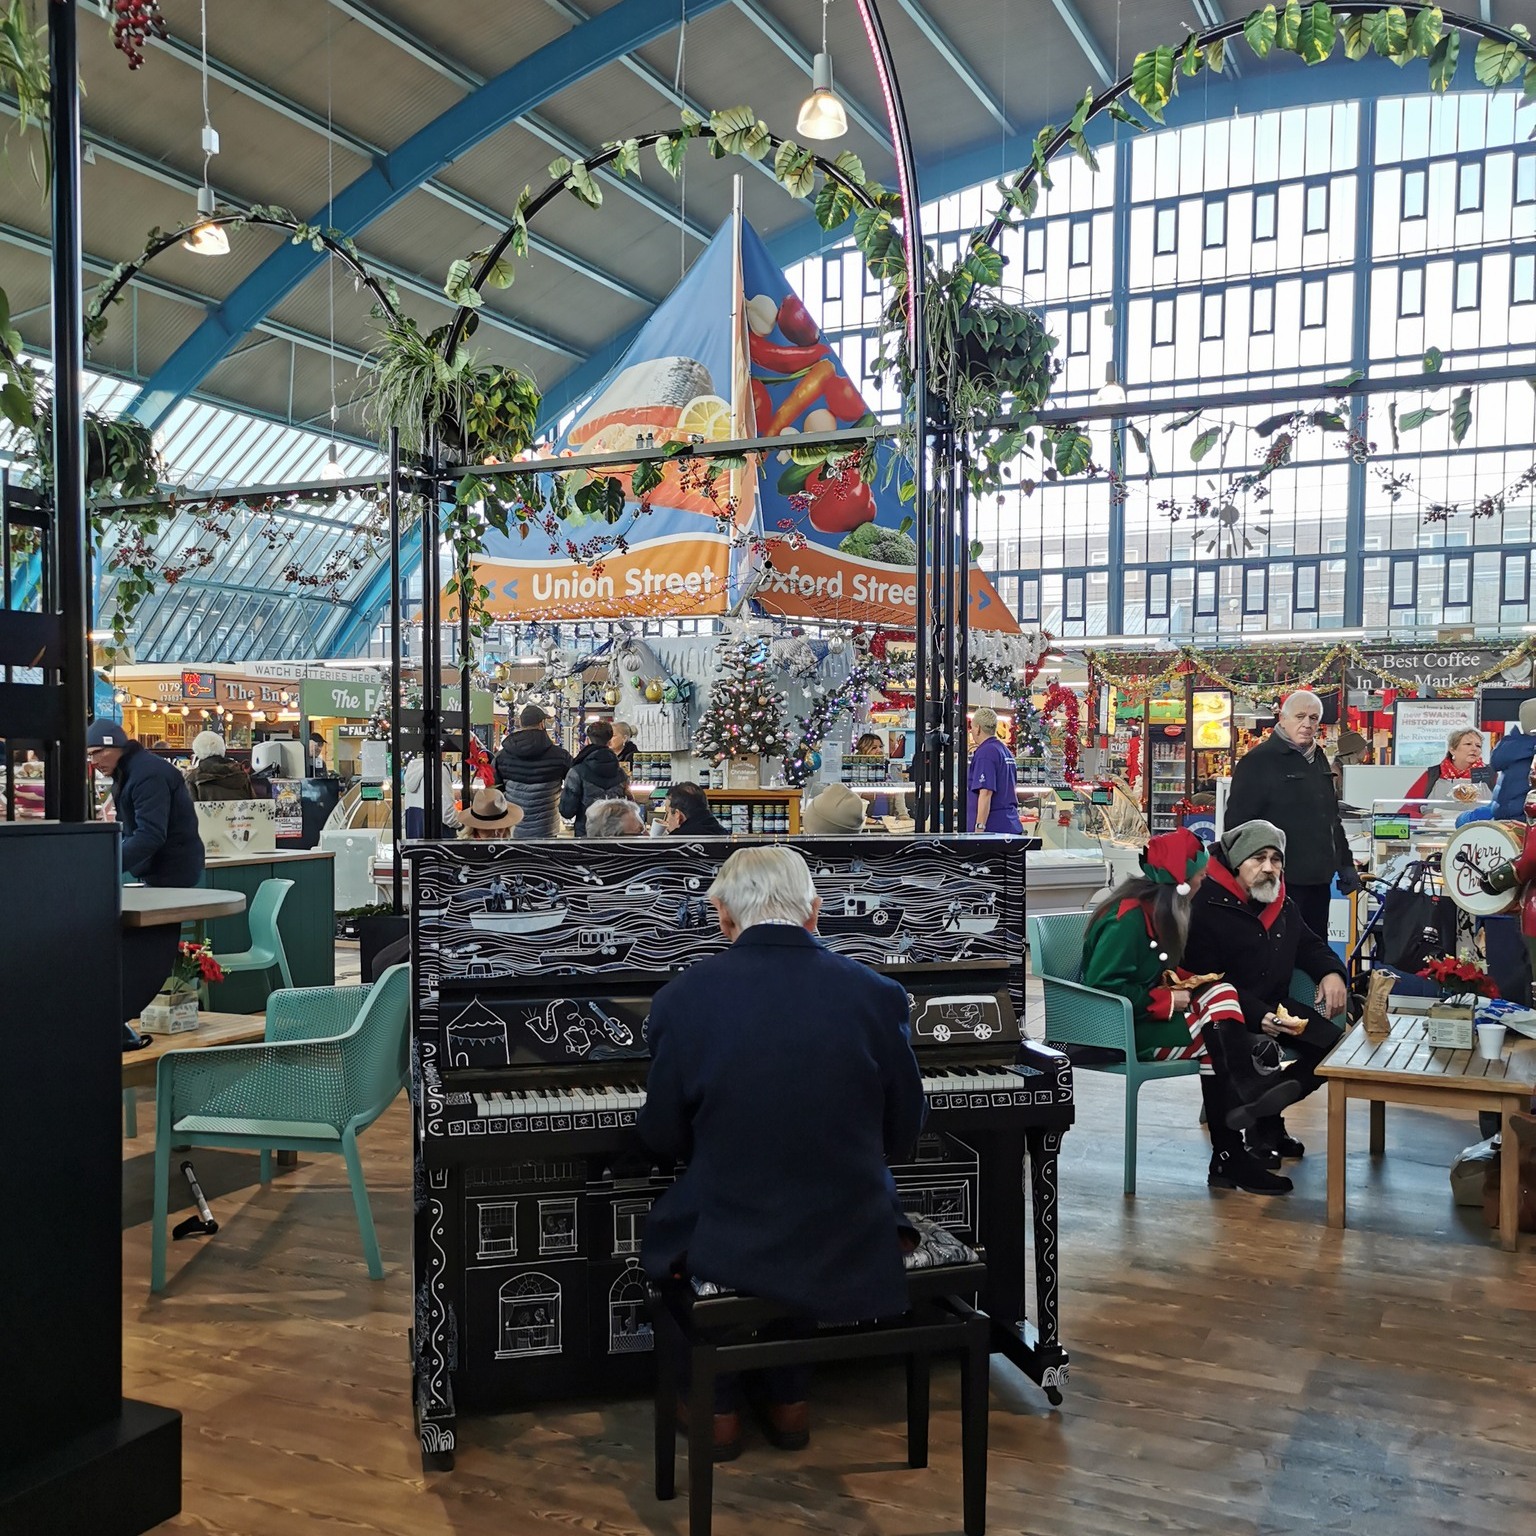 A man playing the piano inside the Swansea Market.